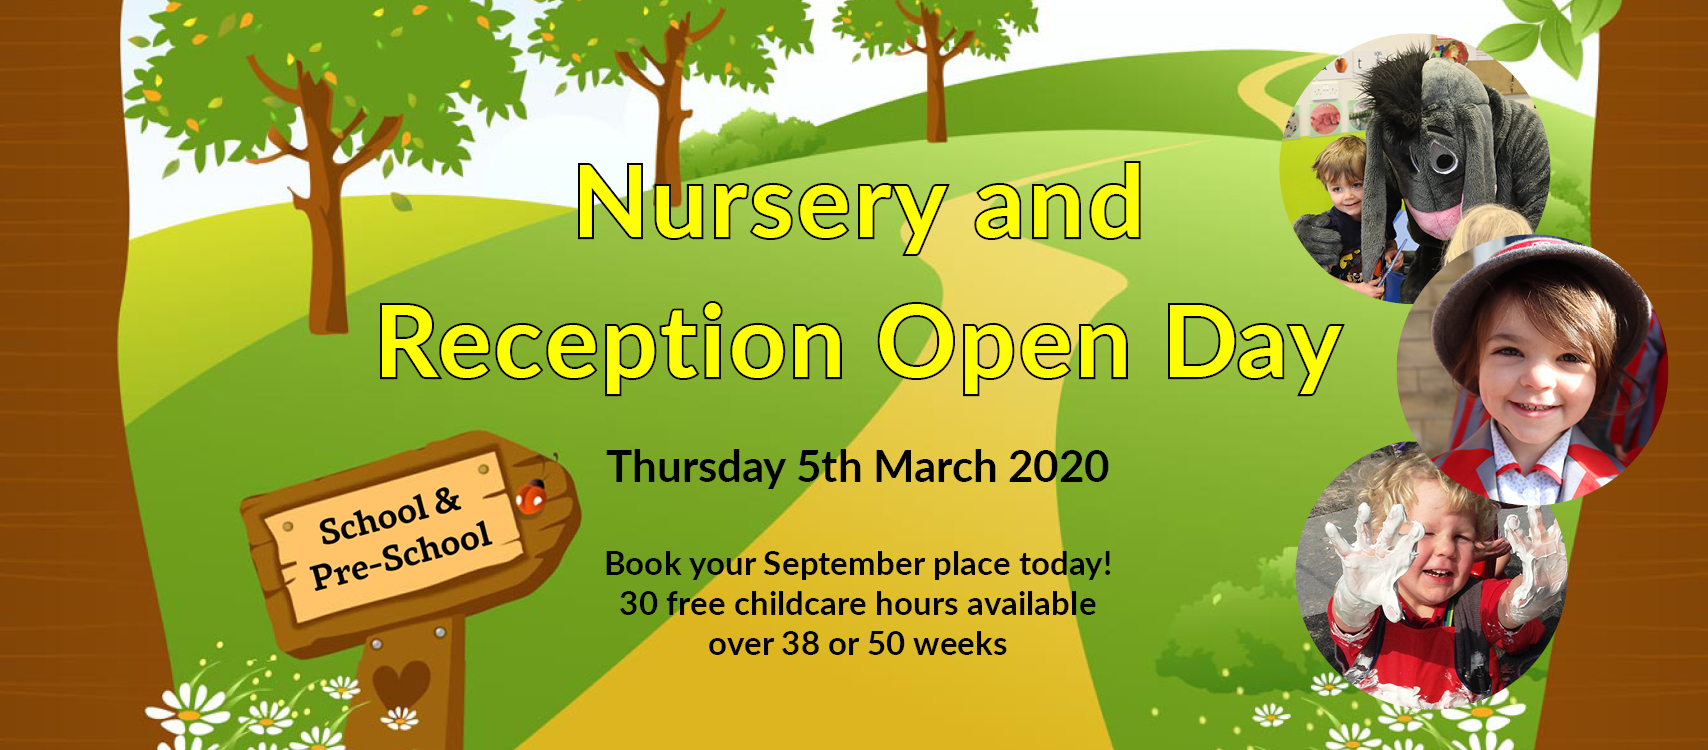 Nursery and Reception Open Day